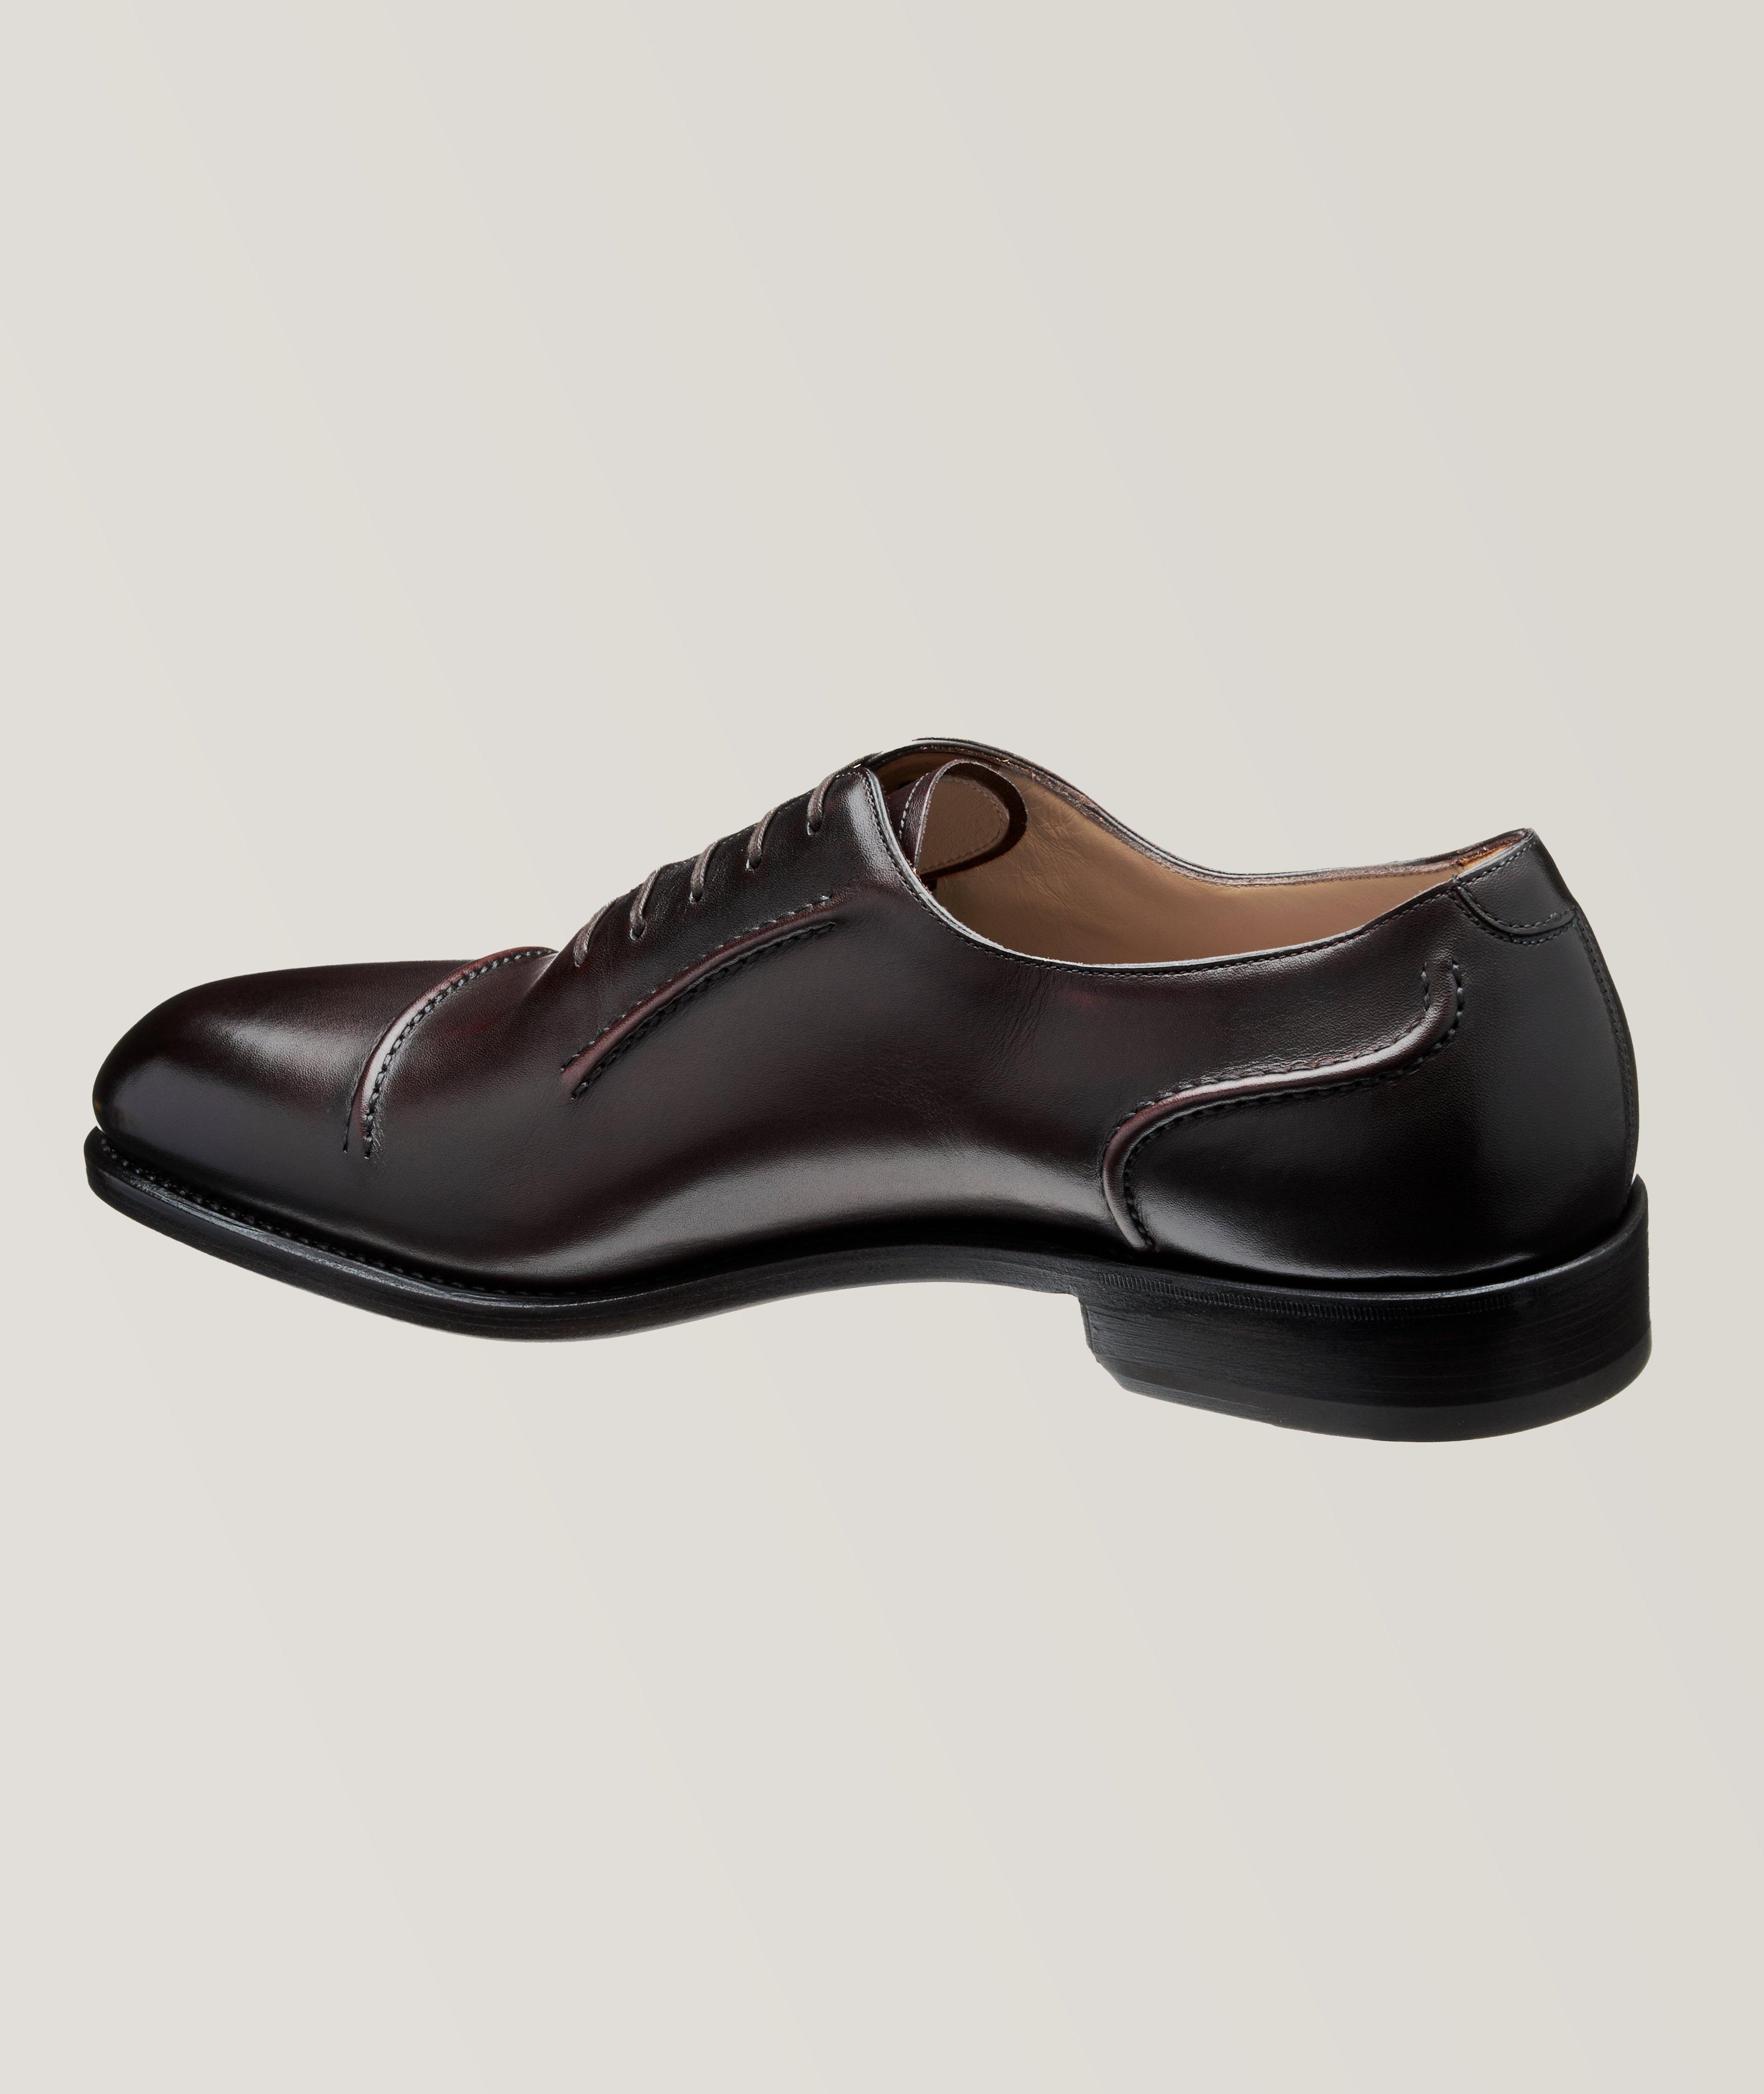 Giave Calf Leather Oxfords image 1